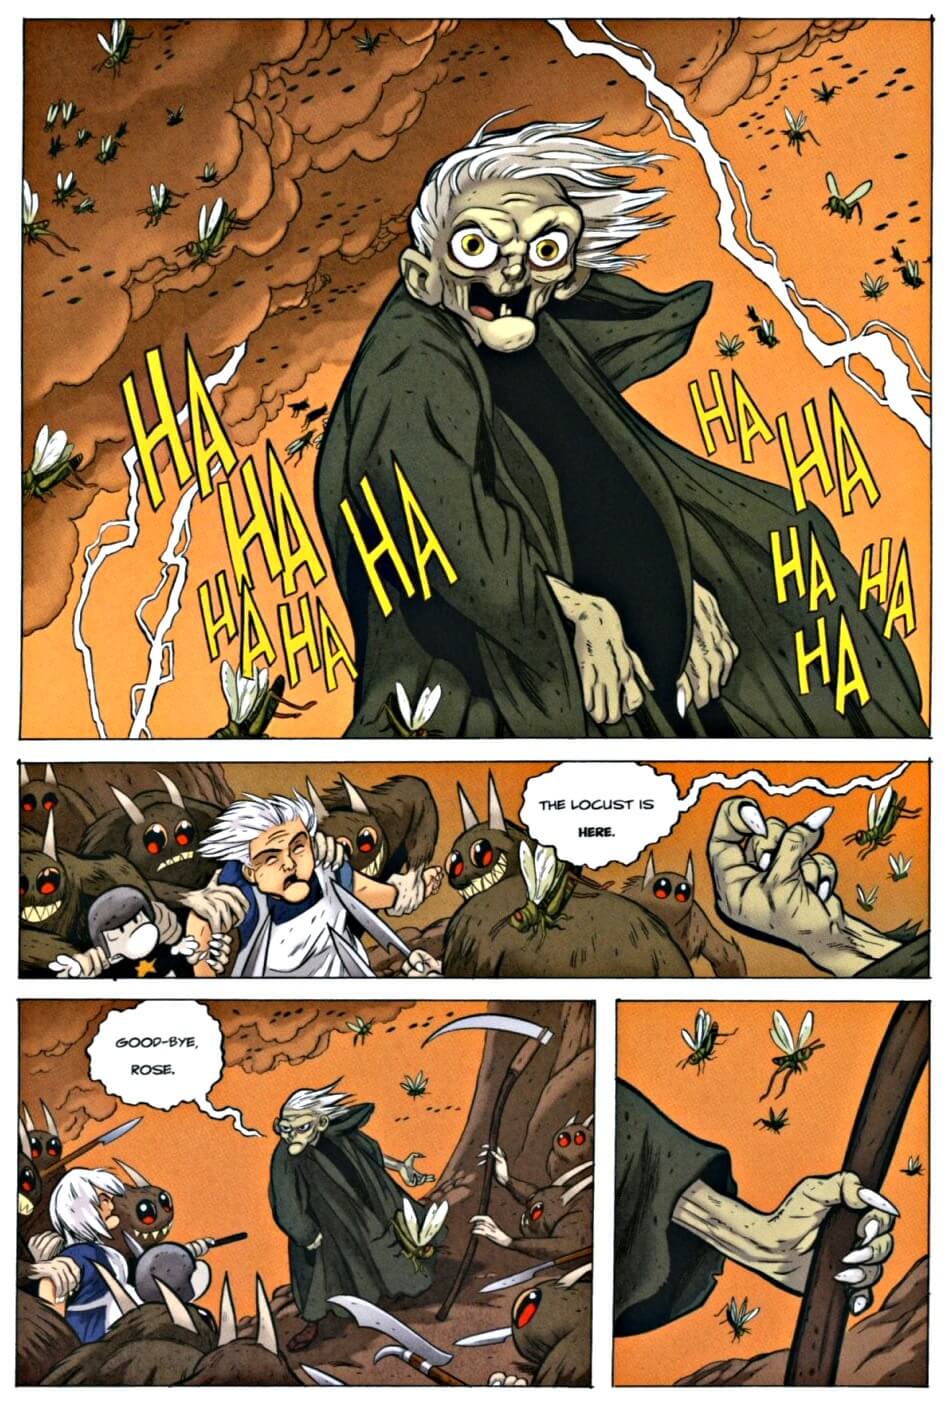 page 143 chapter 5 of bone 9 crown of horns graphic novel